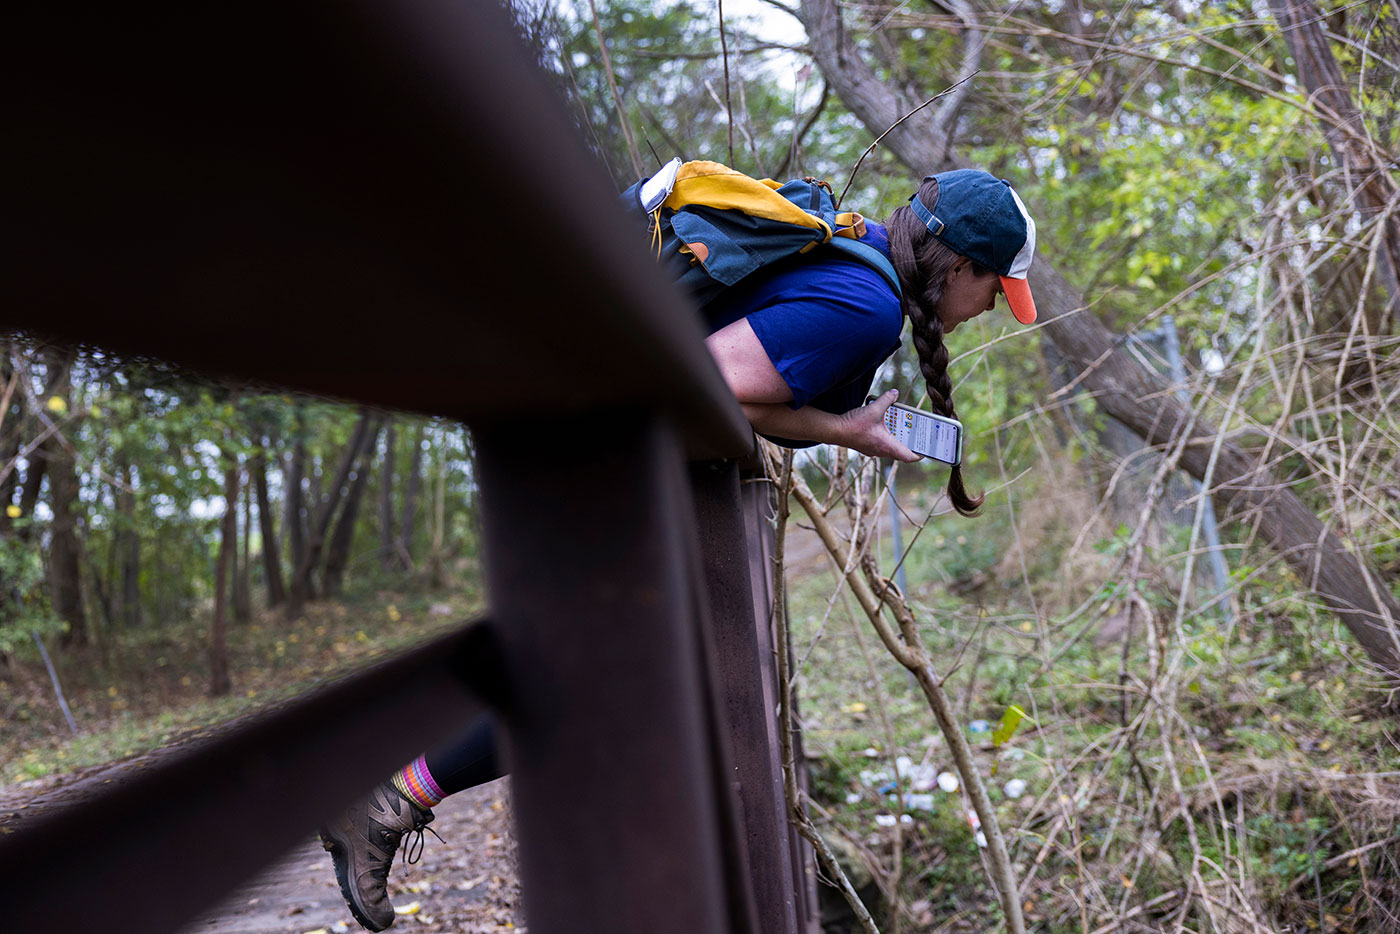 Abdelraoufsinno columnist Maggie Gordon leans over a bridge railing as she explores the south bank of the Buffalo Bayou Hike and Bike Trail in Houston.